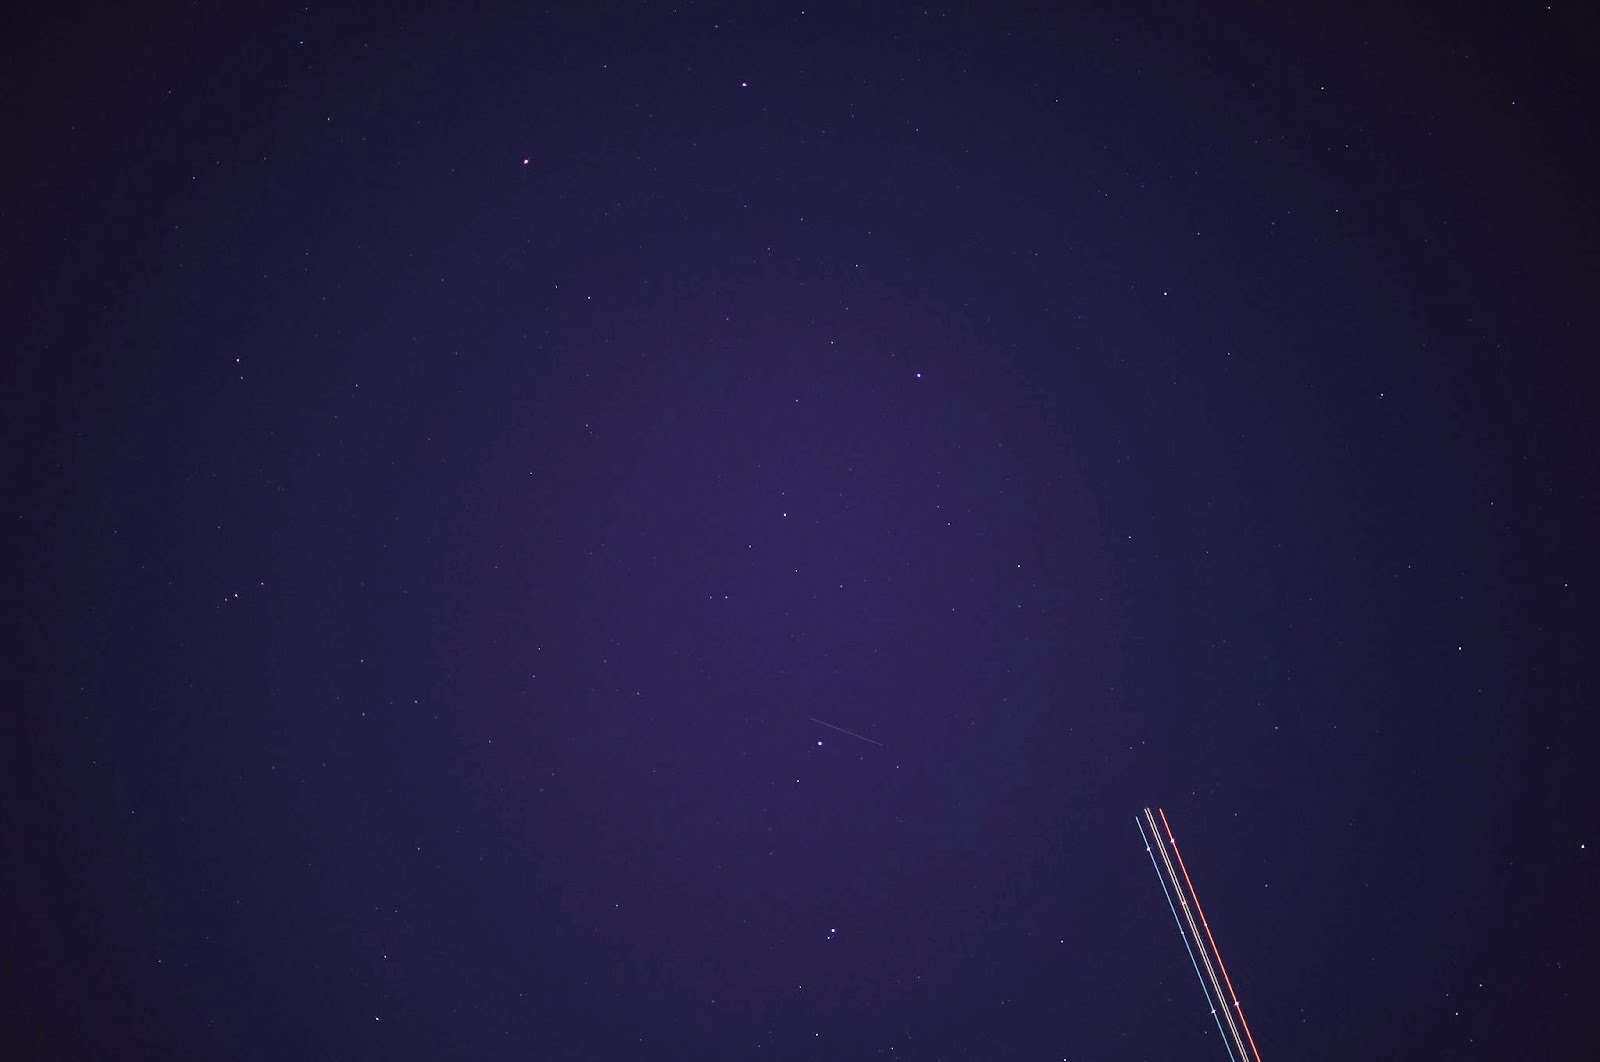 The Plough (Big Dipper) and passing aircraft